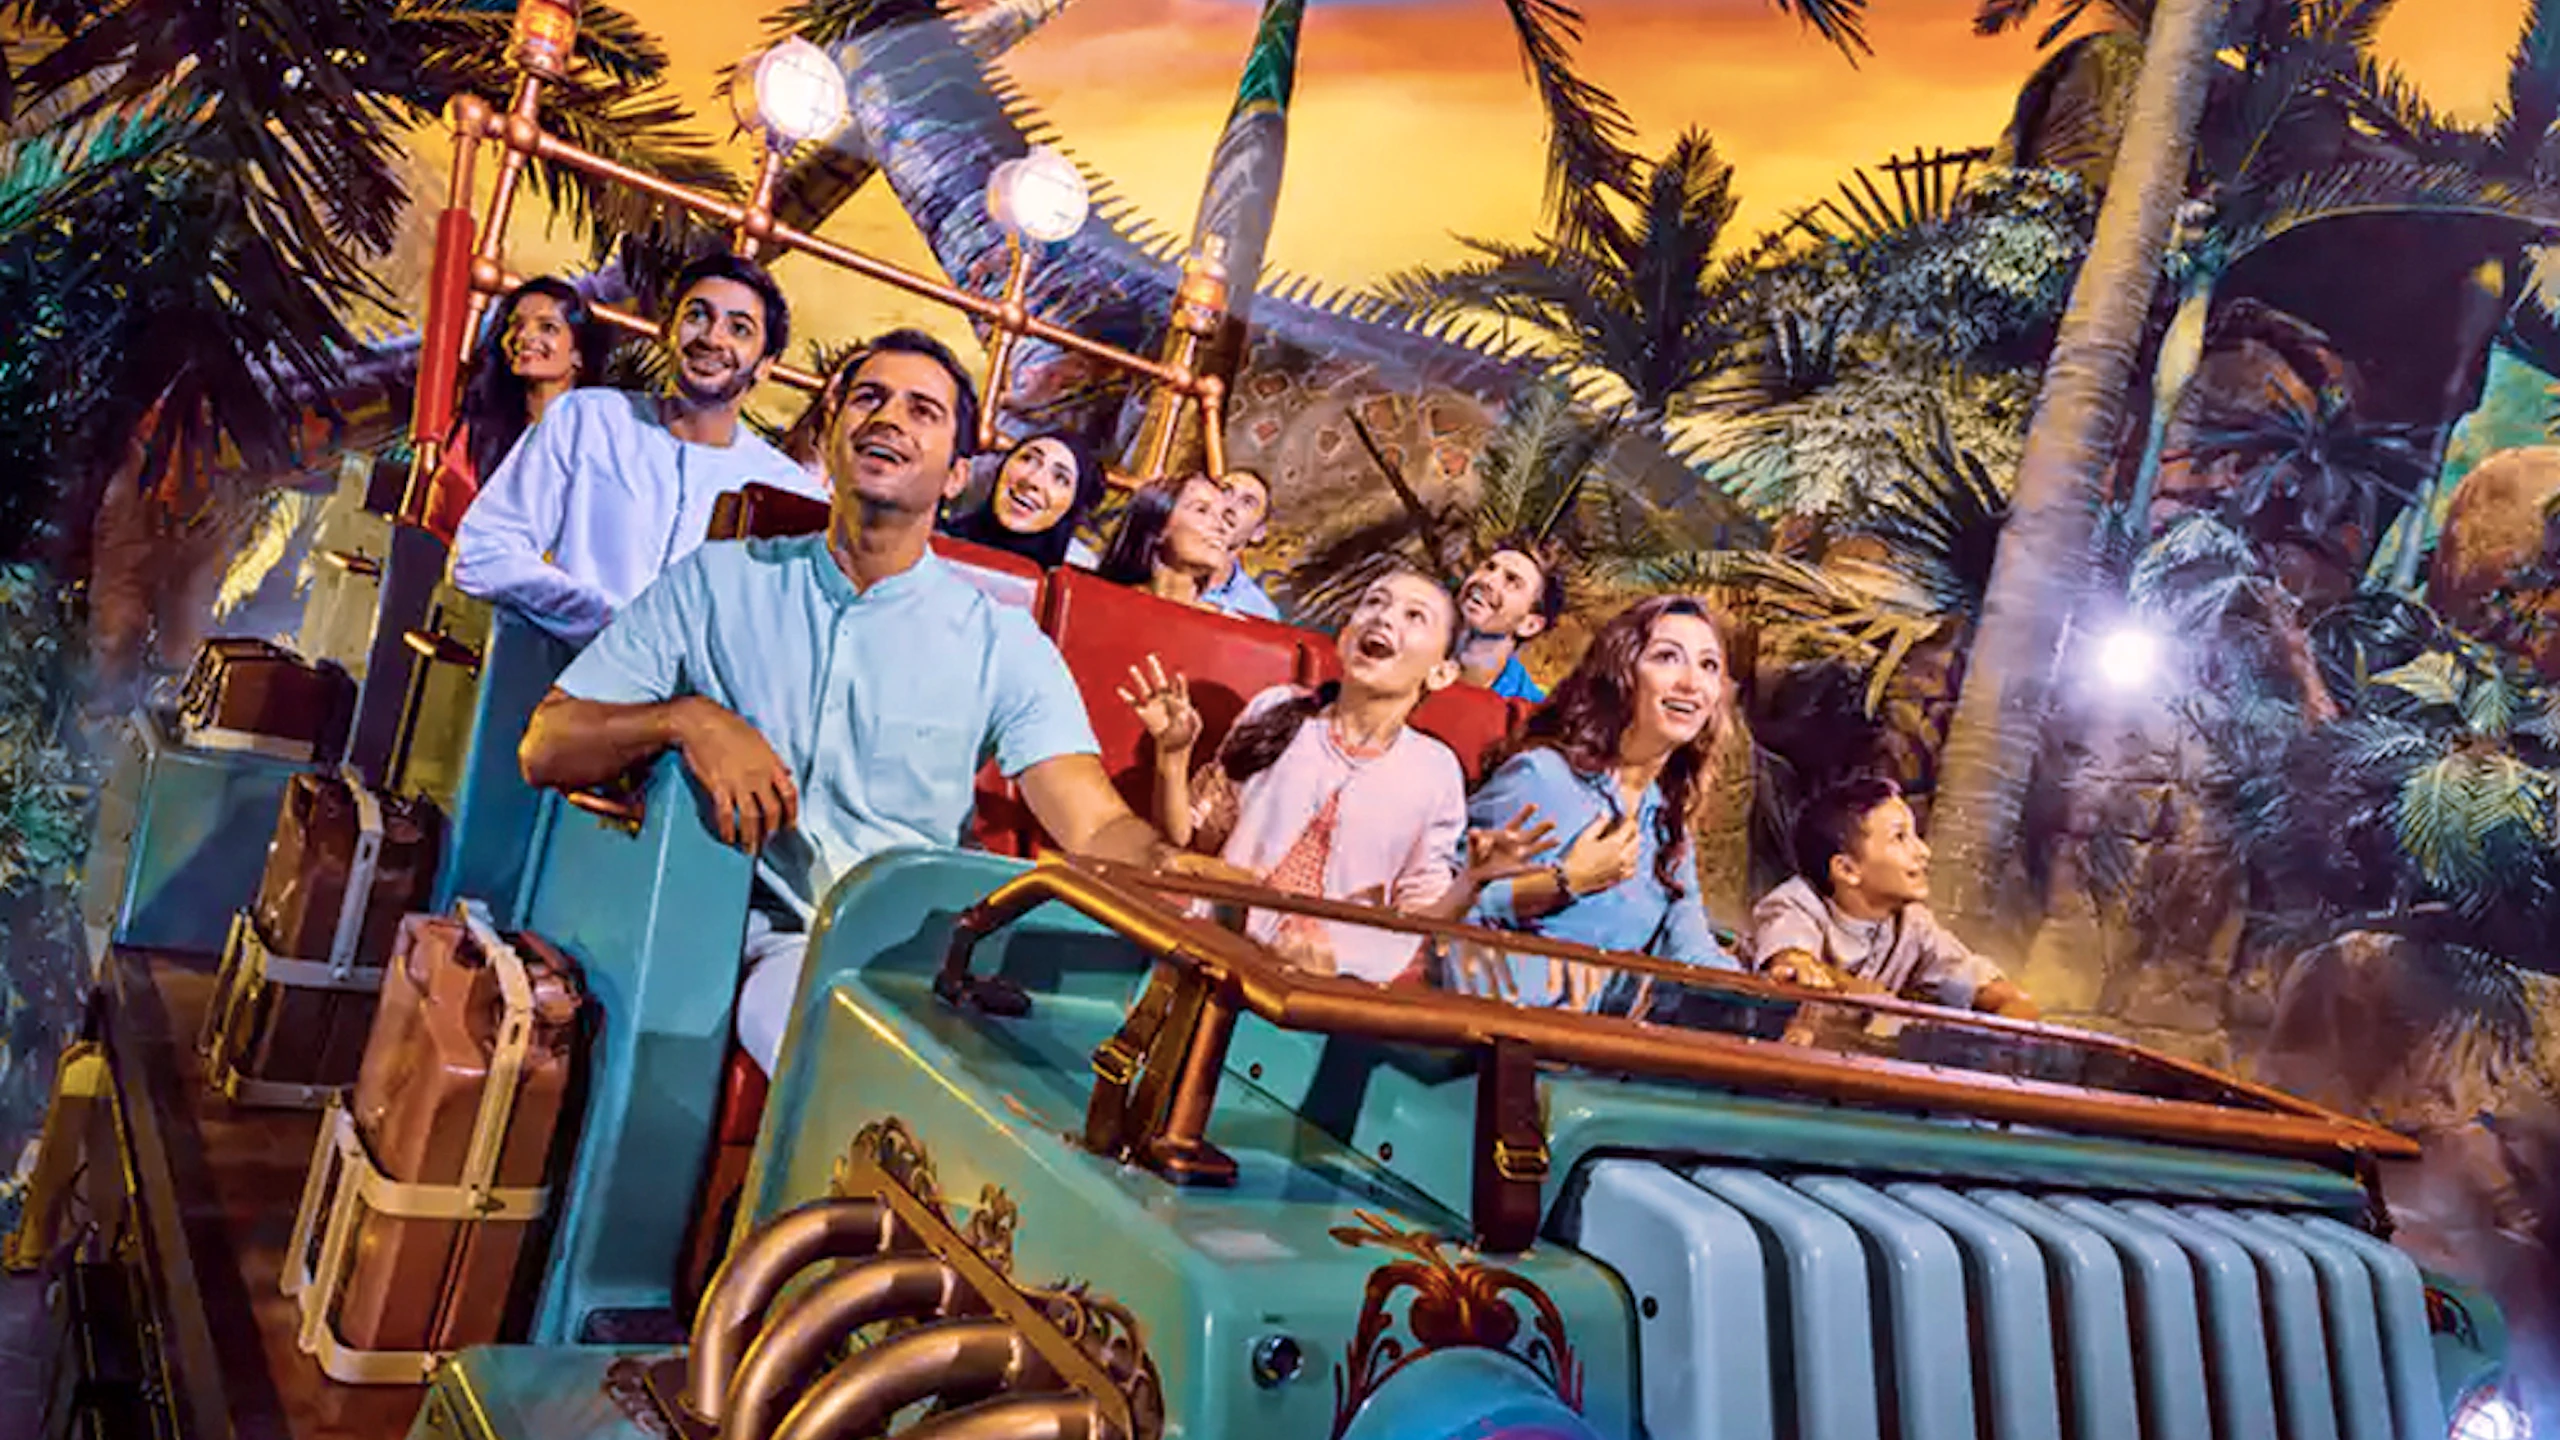 IMG Worlds of Adventure Fast track Ticket Discount